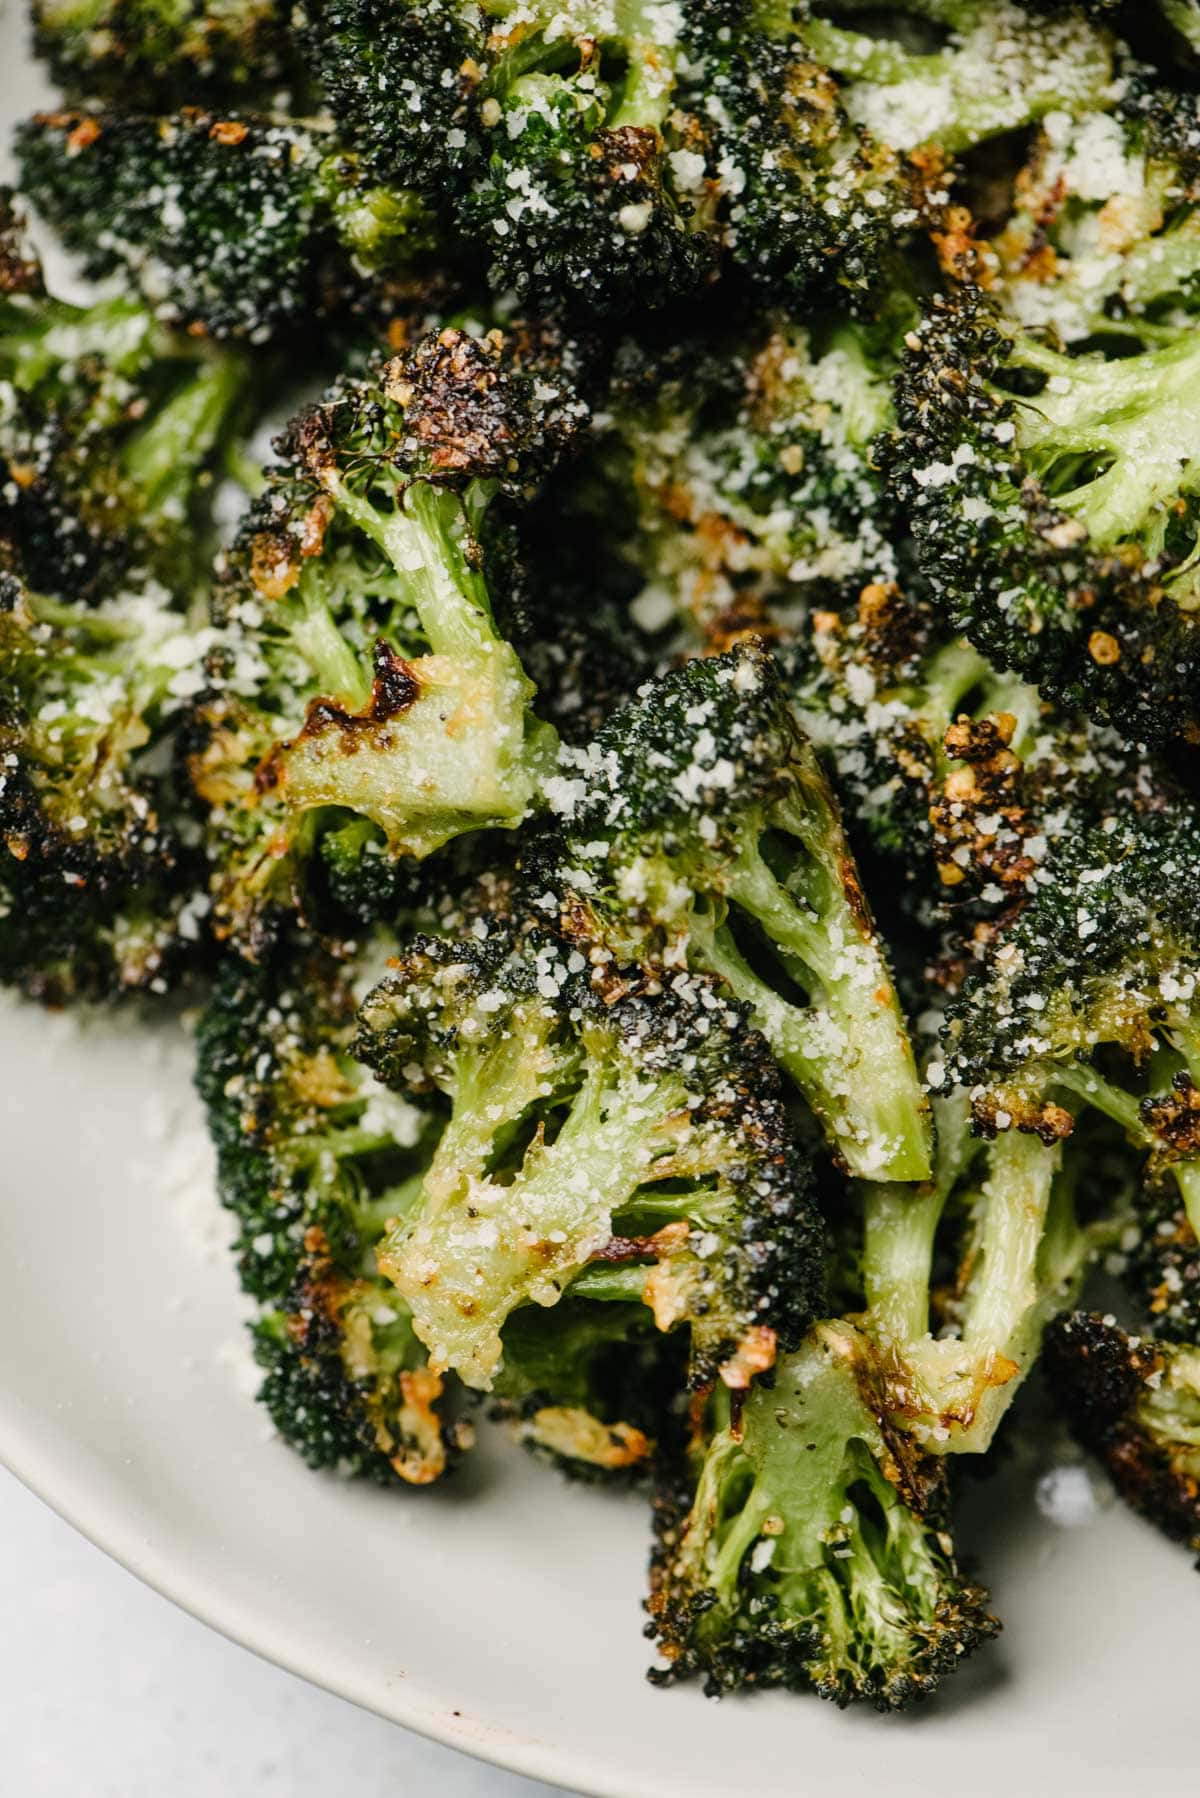 Roasted broccoli with parmesan and garlic in a white serving bowl.